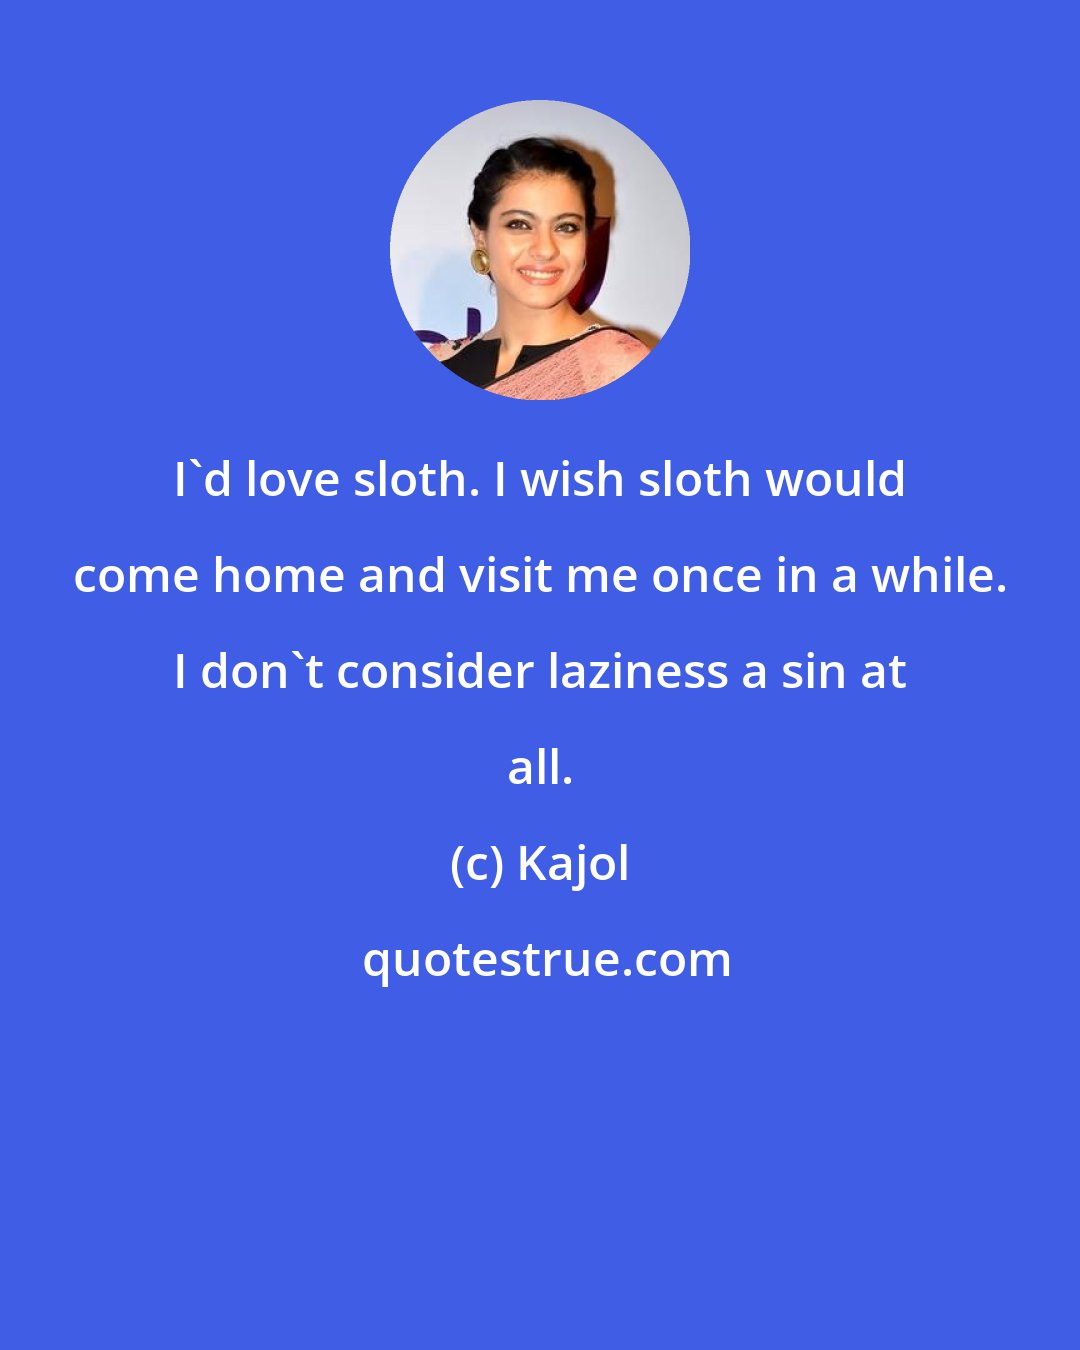 Kajol: I'd love sloth. I wish sloth would come home and visit me once in a while. I don't consider laziness a sin at all.